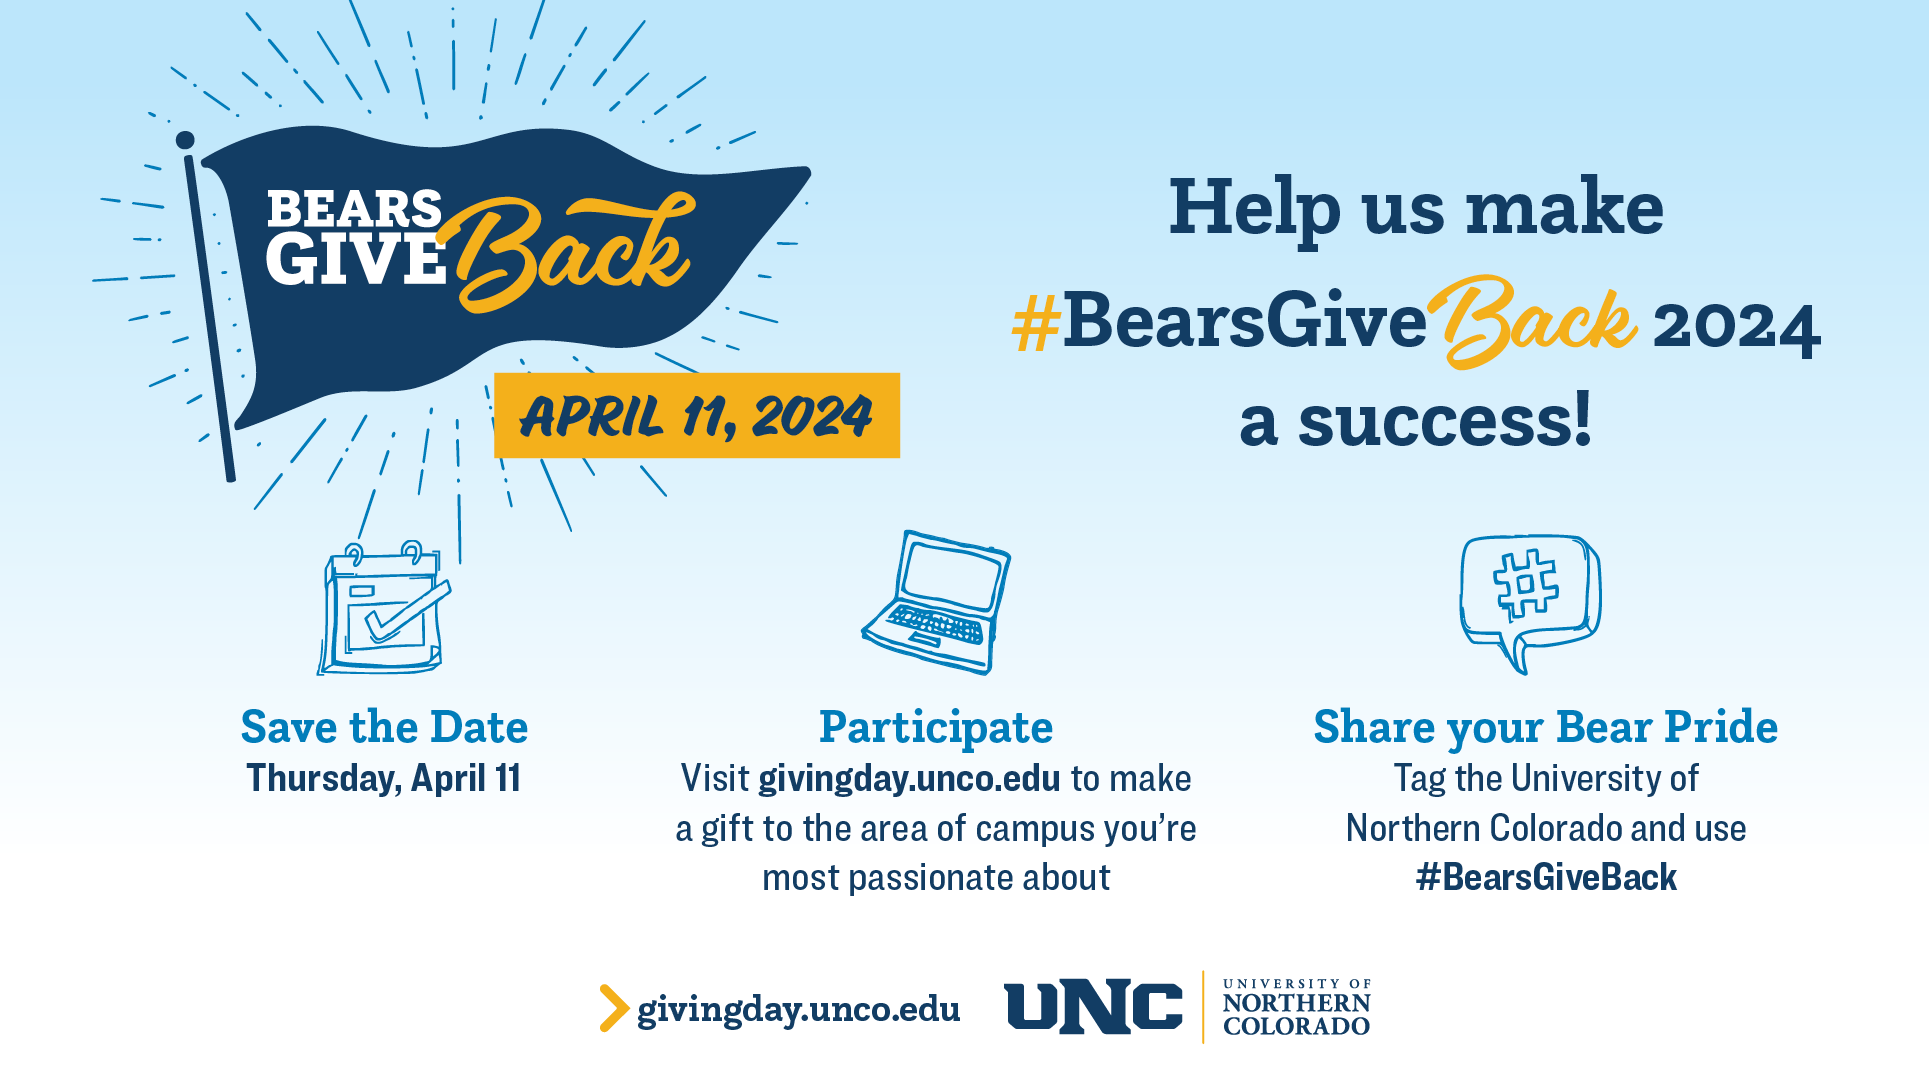 Download Bears Give Back Image